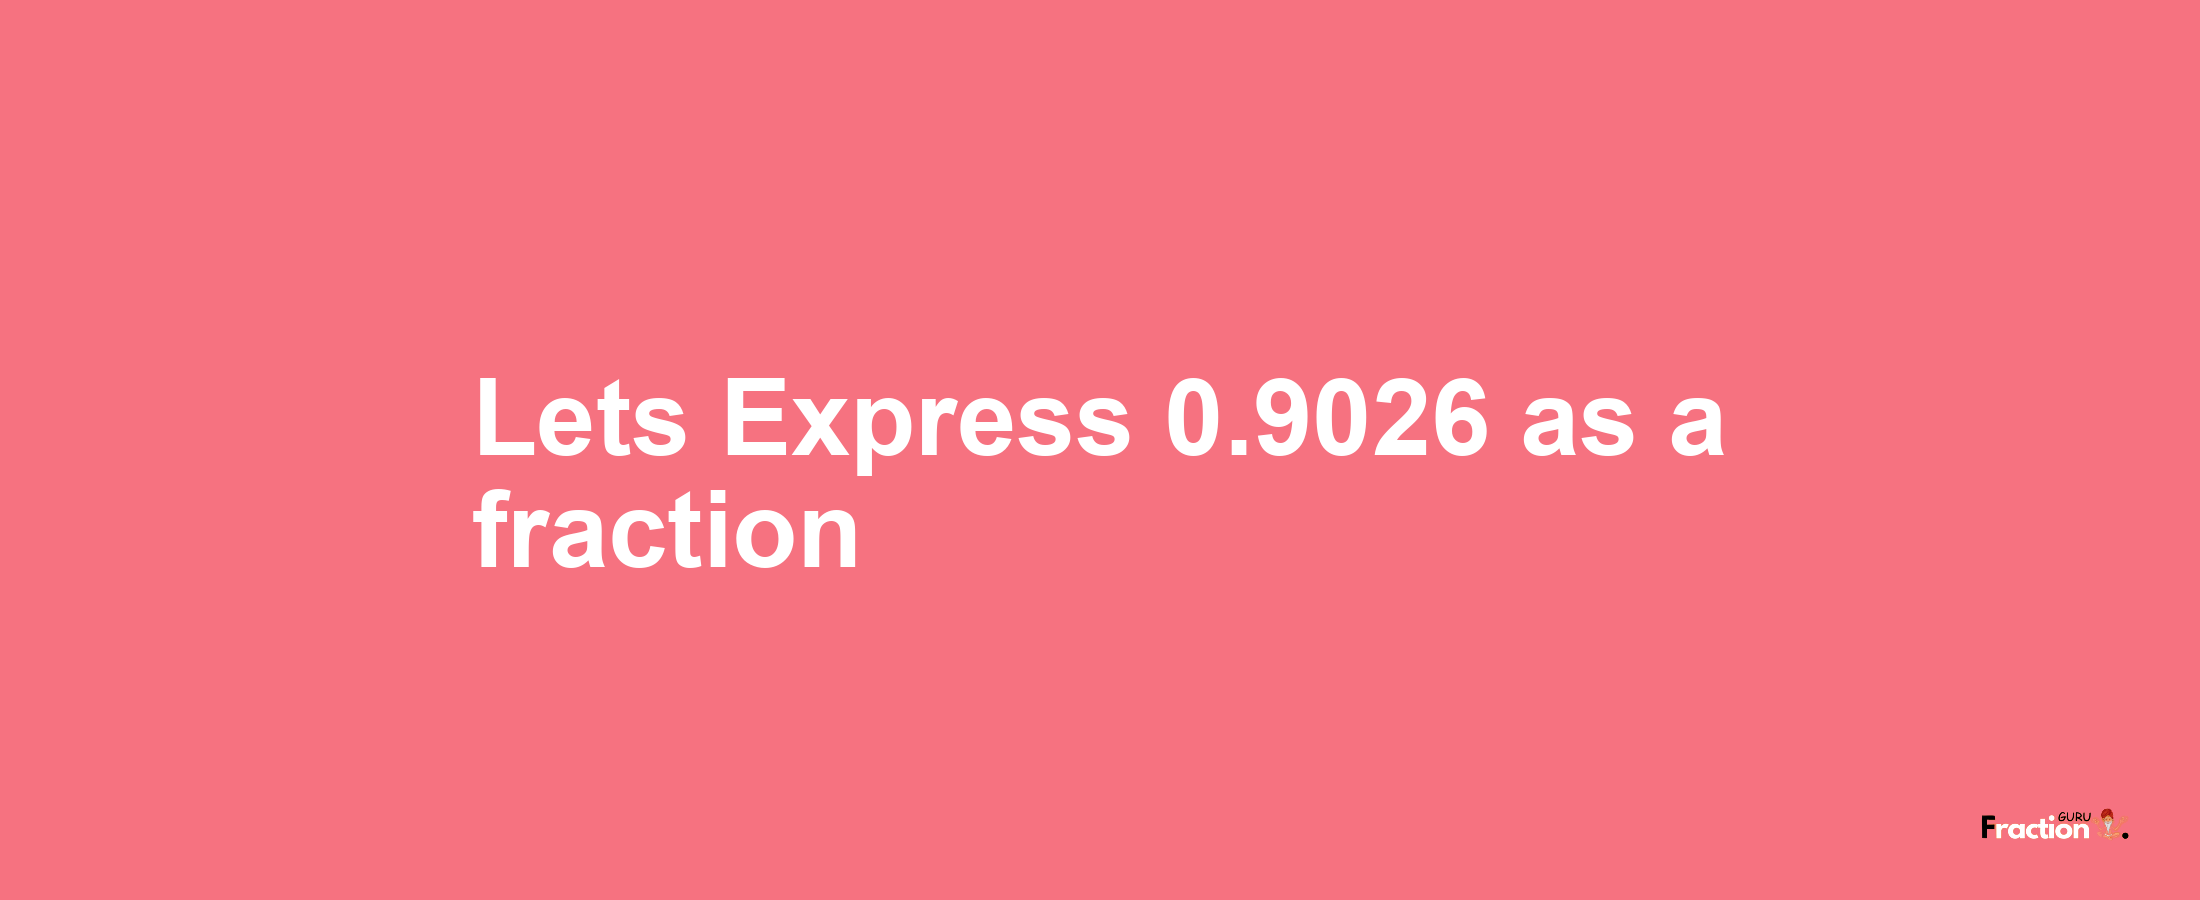 Lets Express 0.9026 as afraction